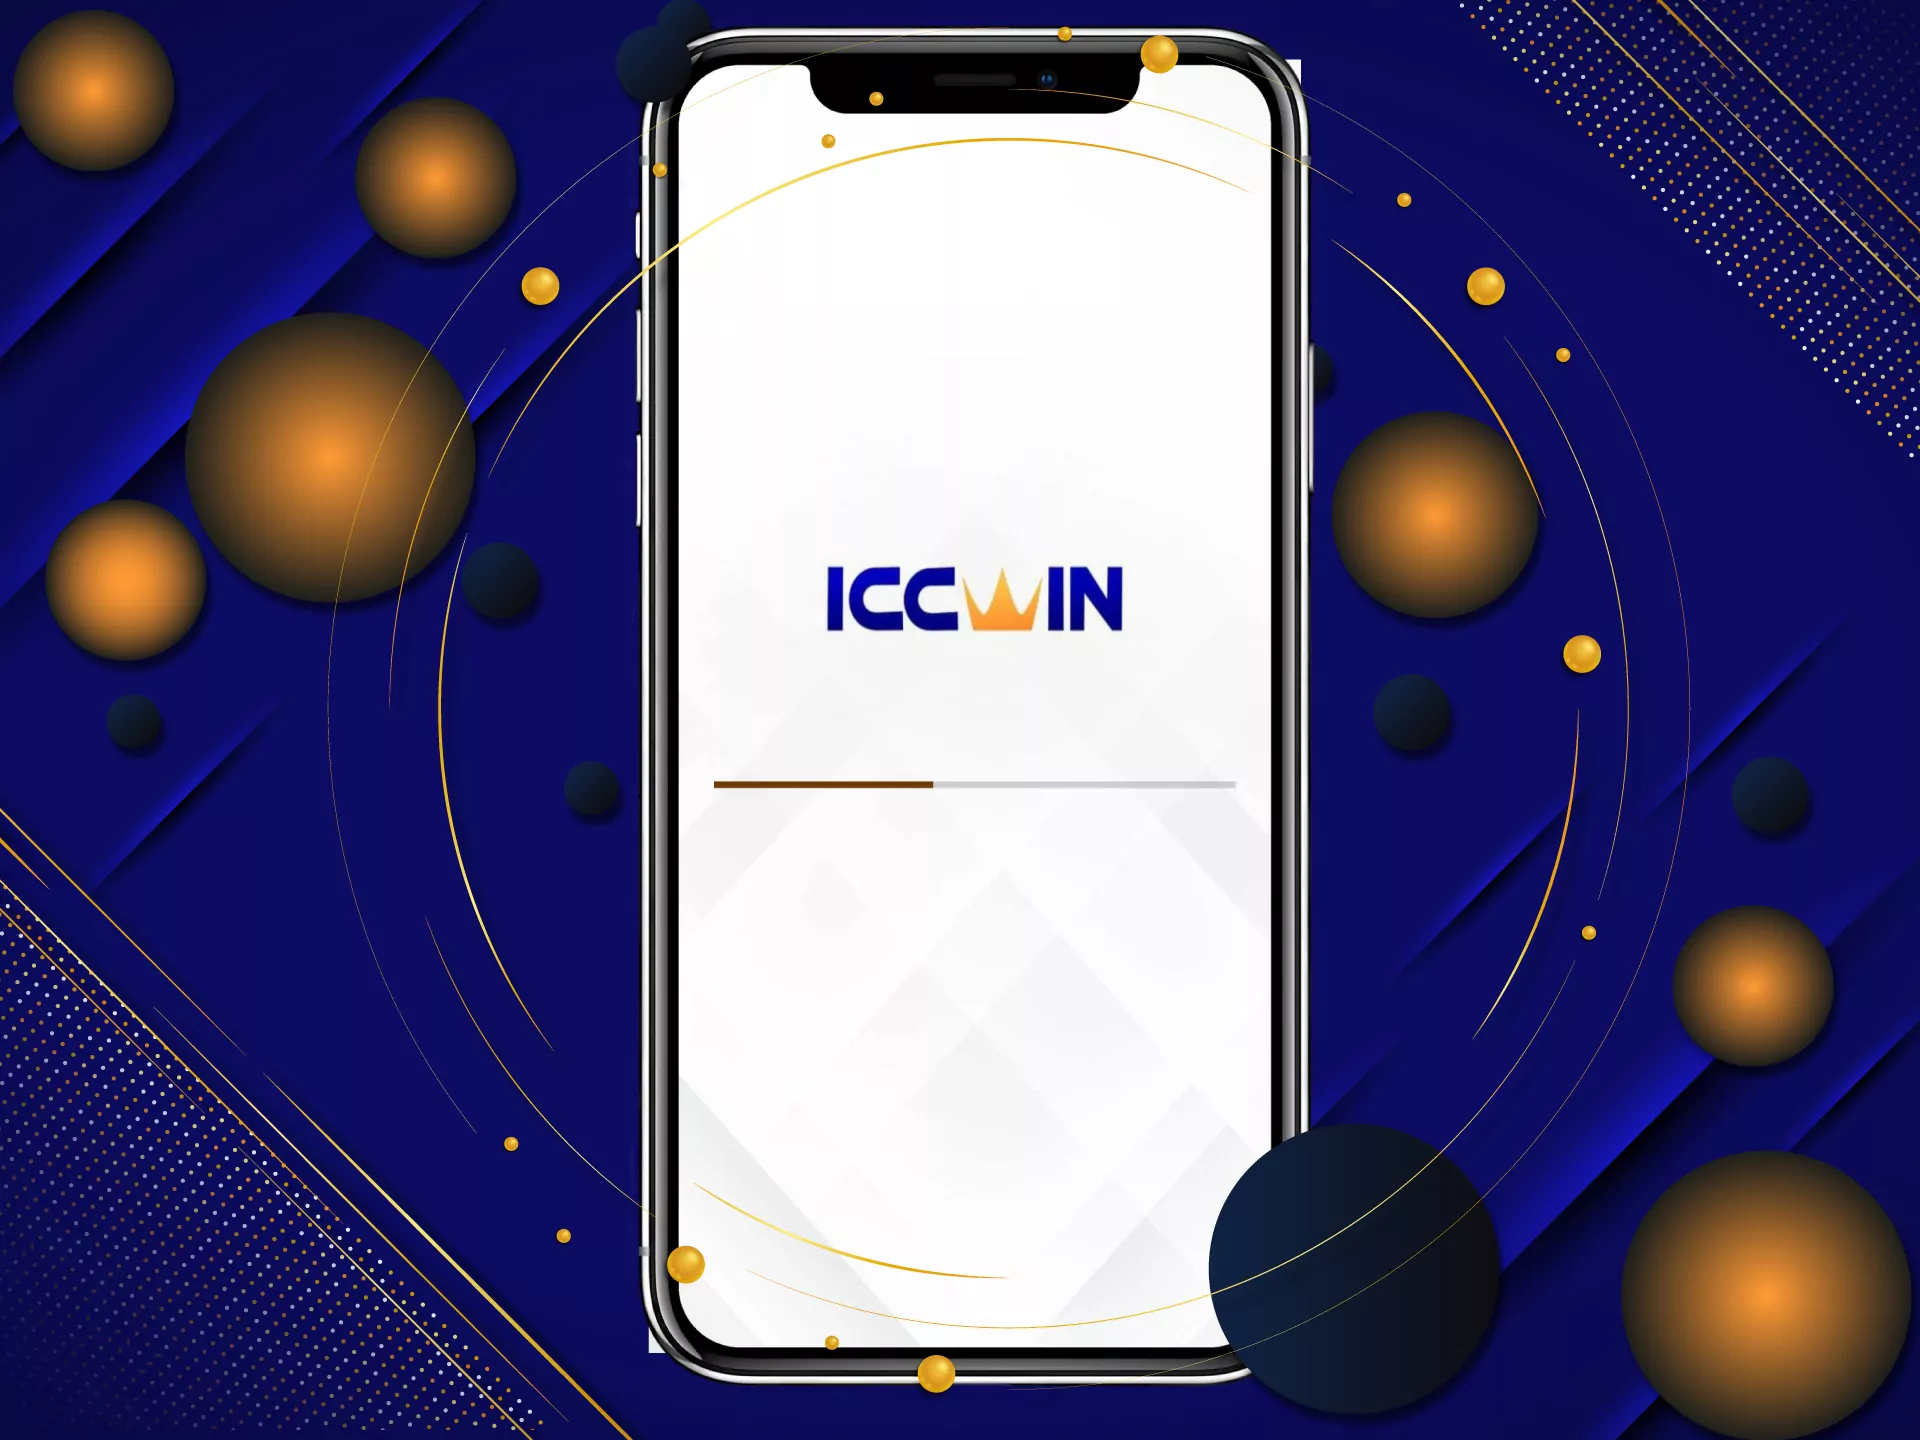 Open the downloaded apk file and install the ICCWIN app.